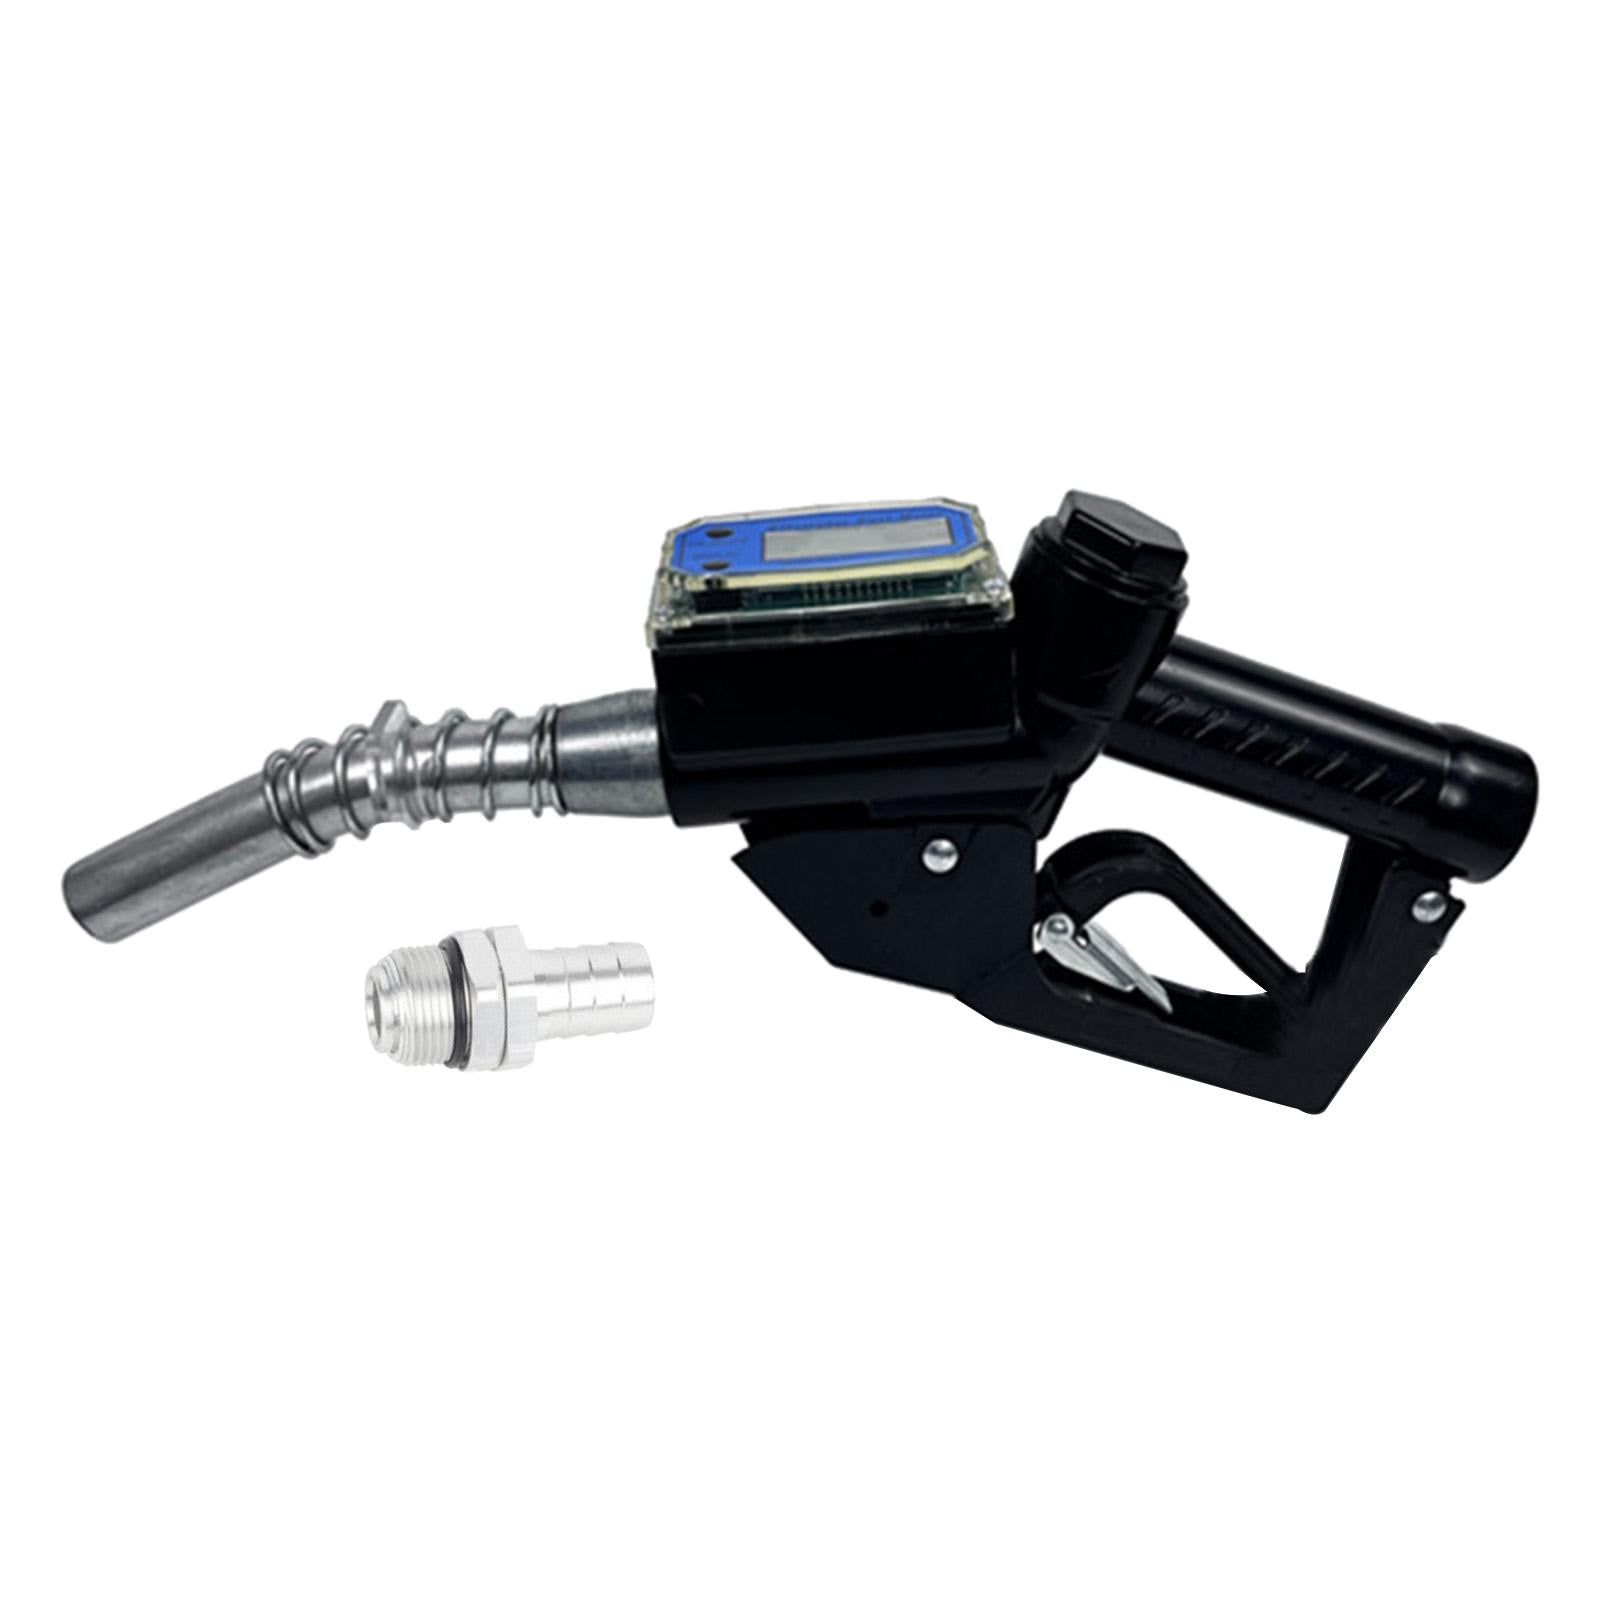 1 inch Manual Fueling Nozzle with Metering for Biodiesel Petrol Black